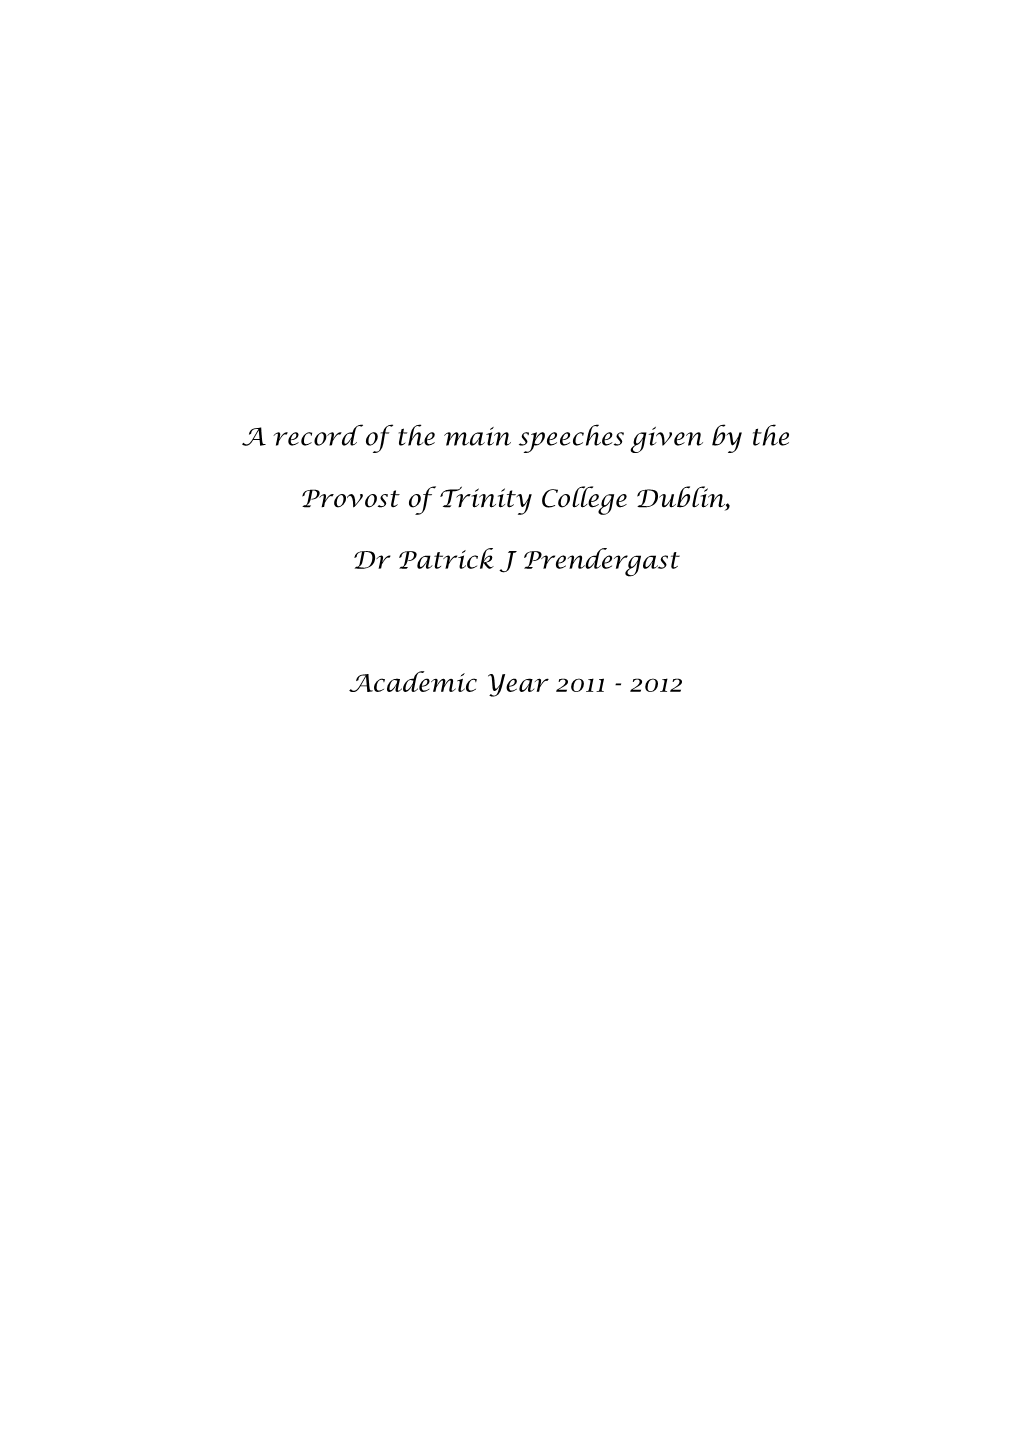 A Record of the Main Speeches Given by the Provost Of